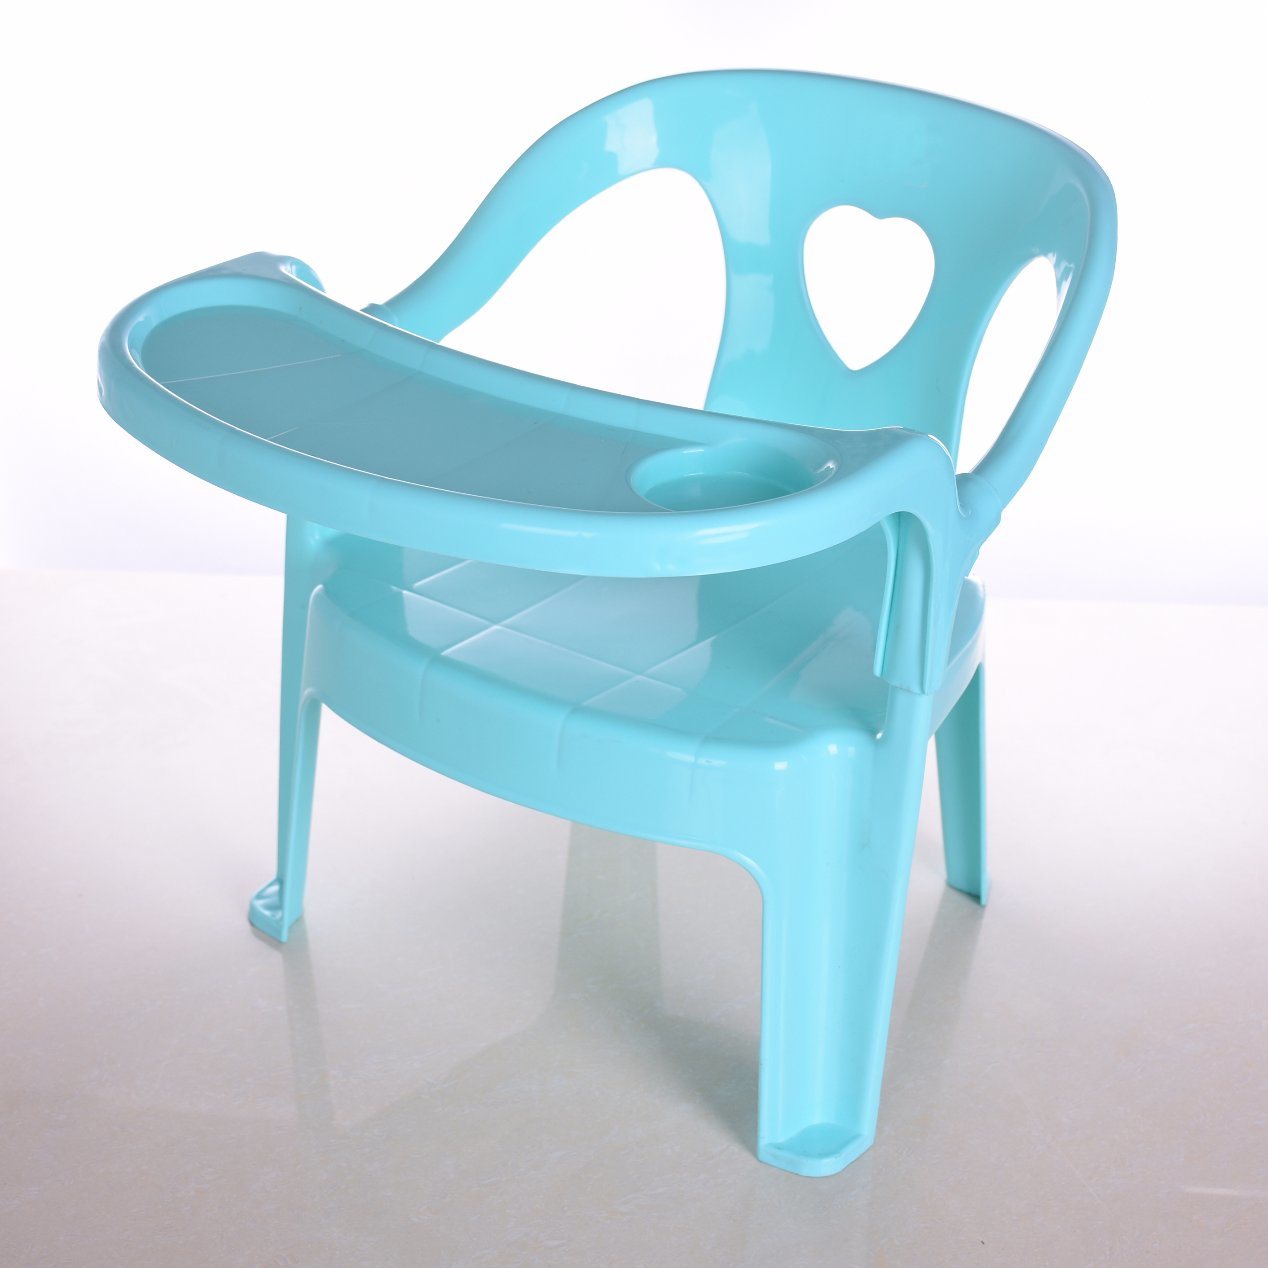 /proimages/2f0j00htCYgFEIacbe/2017-new-sample-colorful-baby-eating-food-sitting-small-pp-plastic-chair-with-heart-shape.jpg